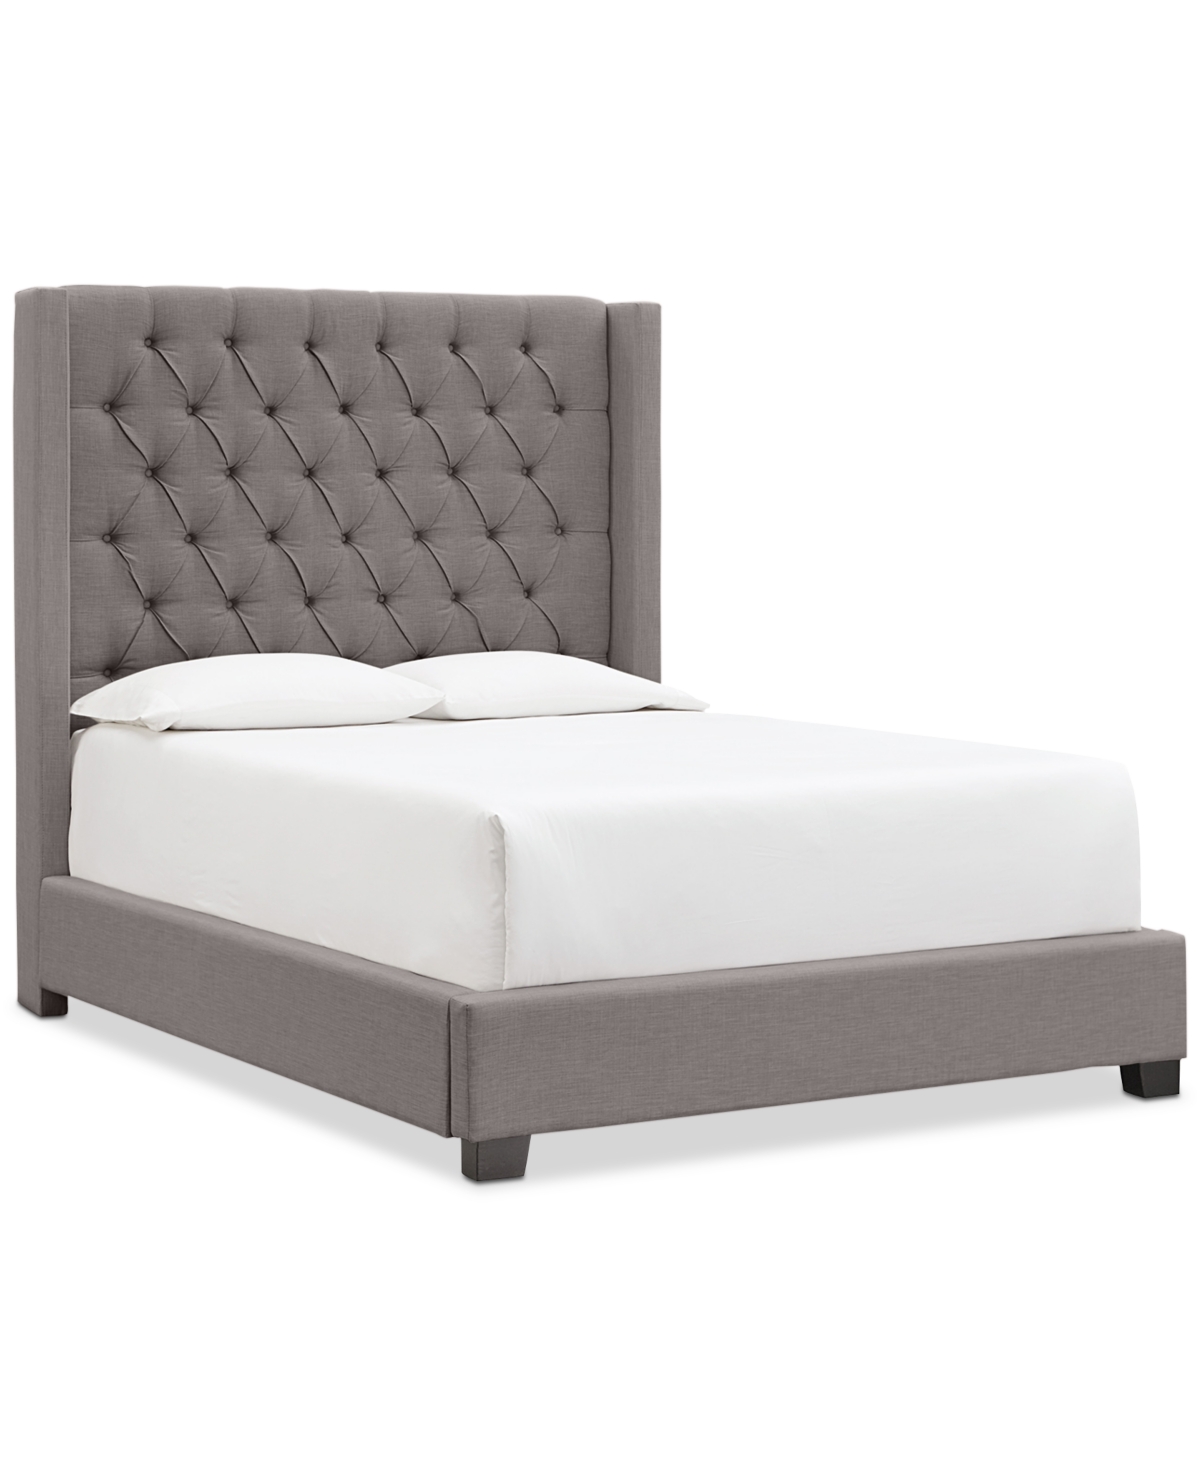 Shop Furniture Monroe Ii Upholstered Full Bed, Created For Macy's In Charcoal